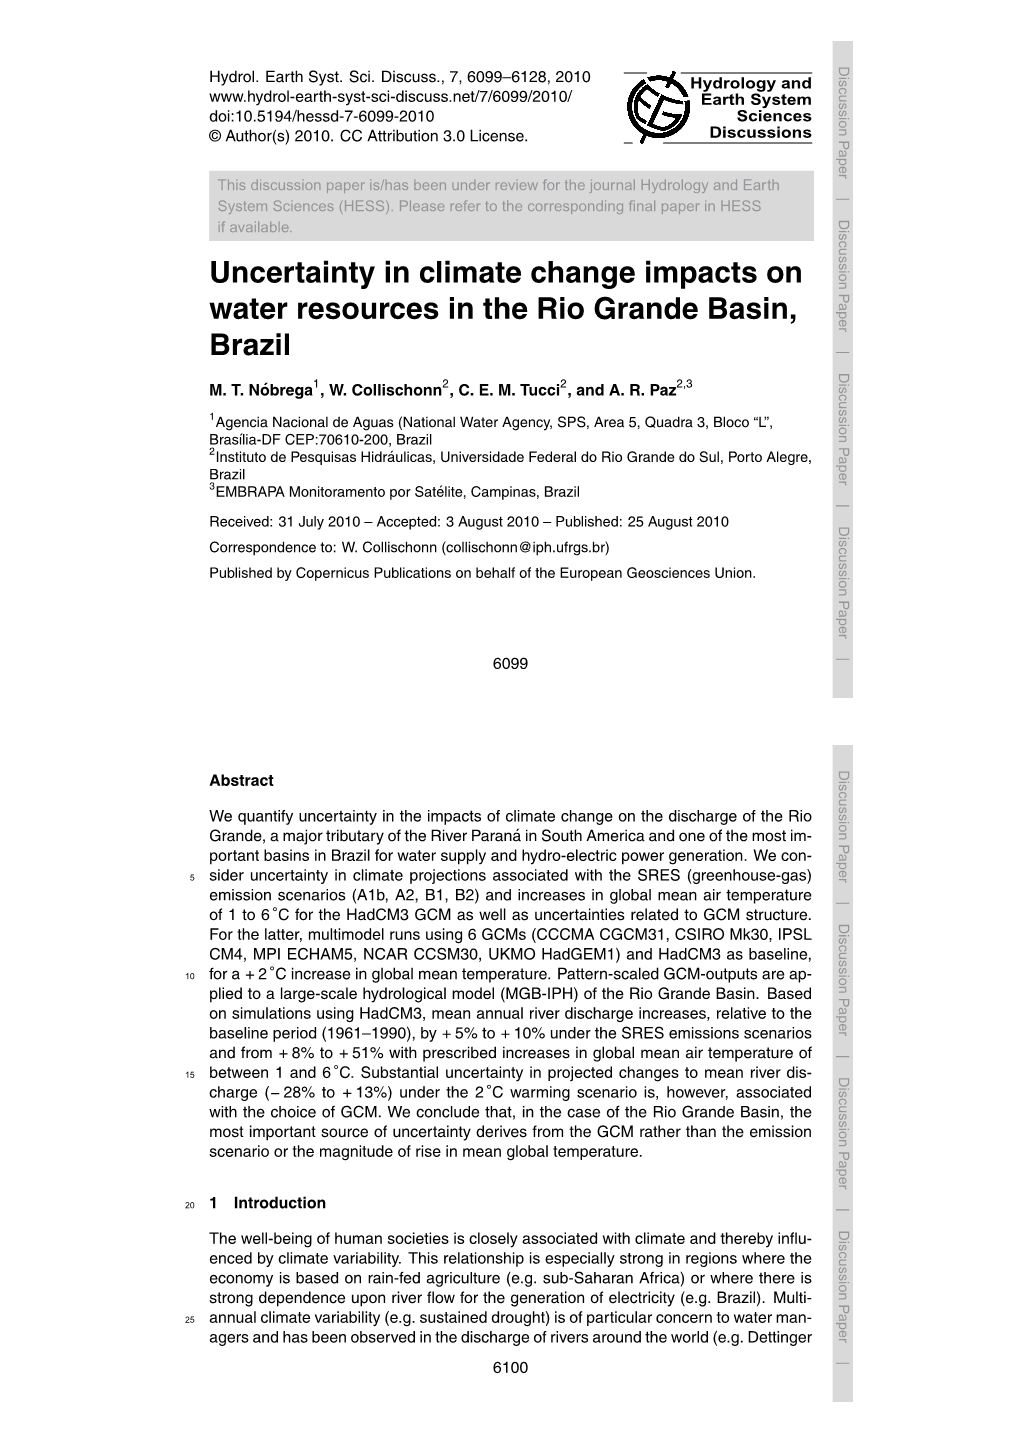 Uncertainty in Climate Change Impacts on Water Resources in the Rio